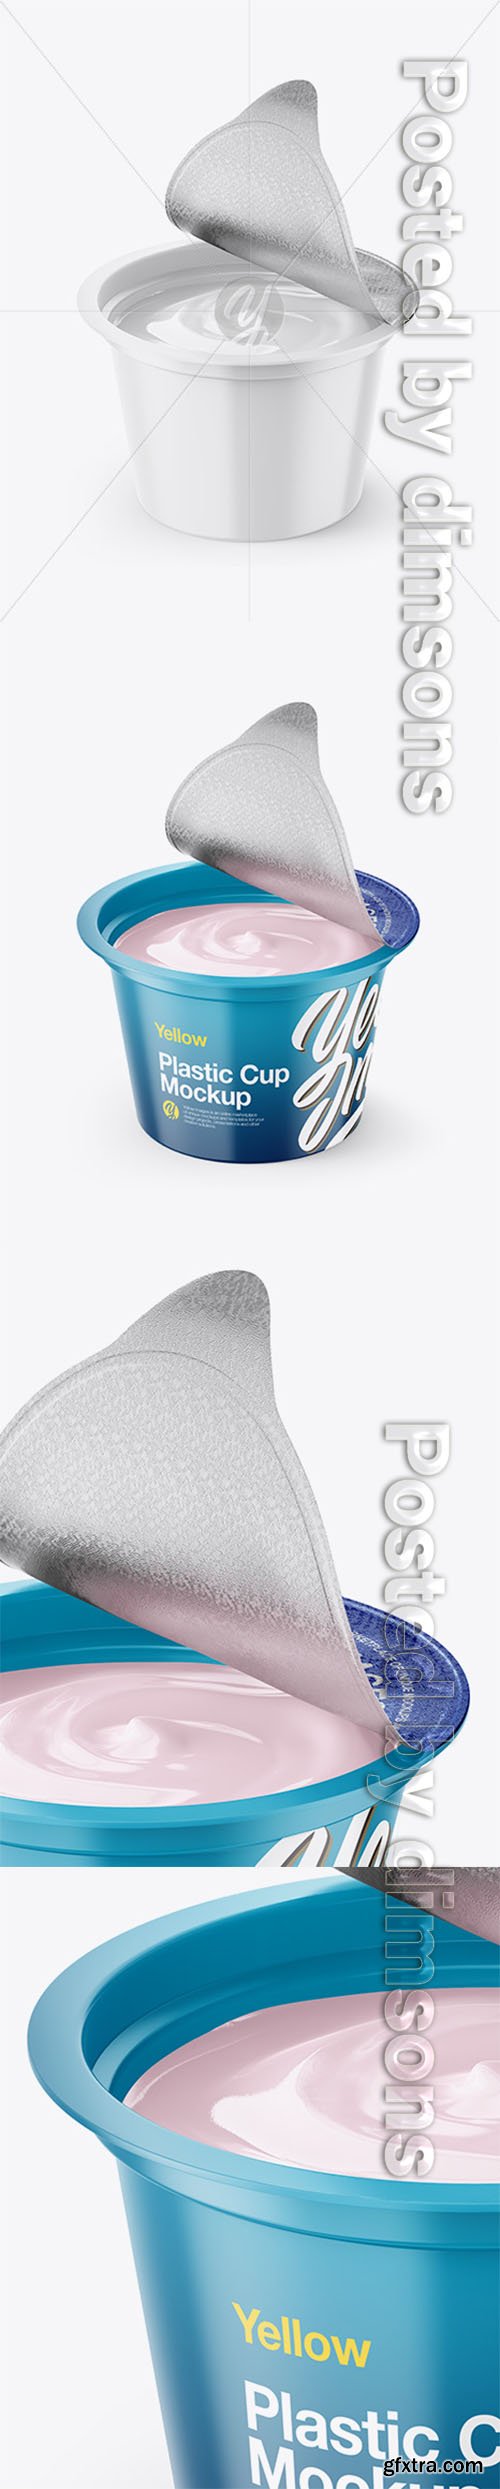 Opened Cup Mockup - Front View (High-Angle Shot) 27194